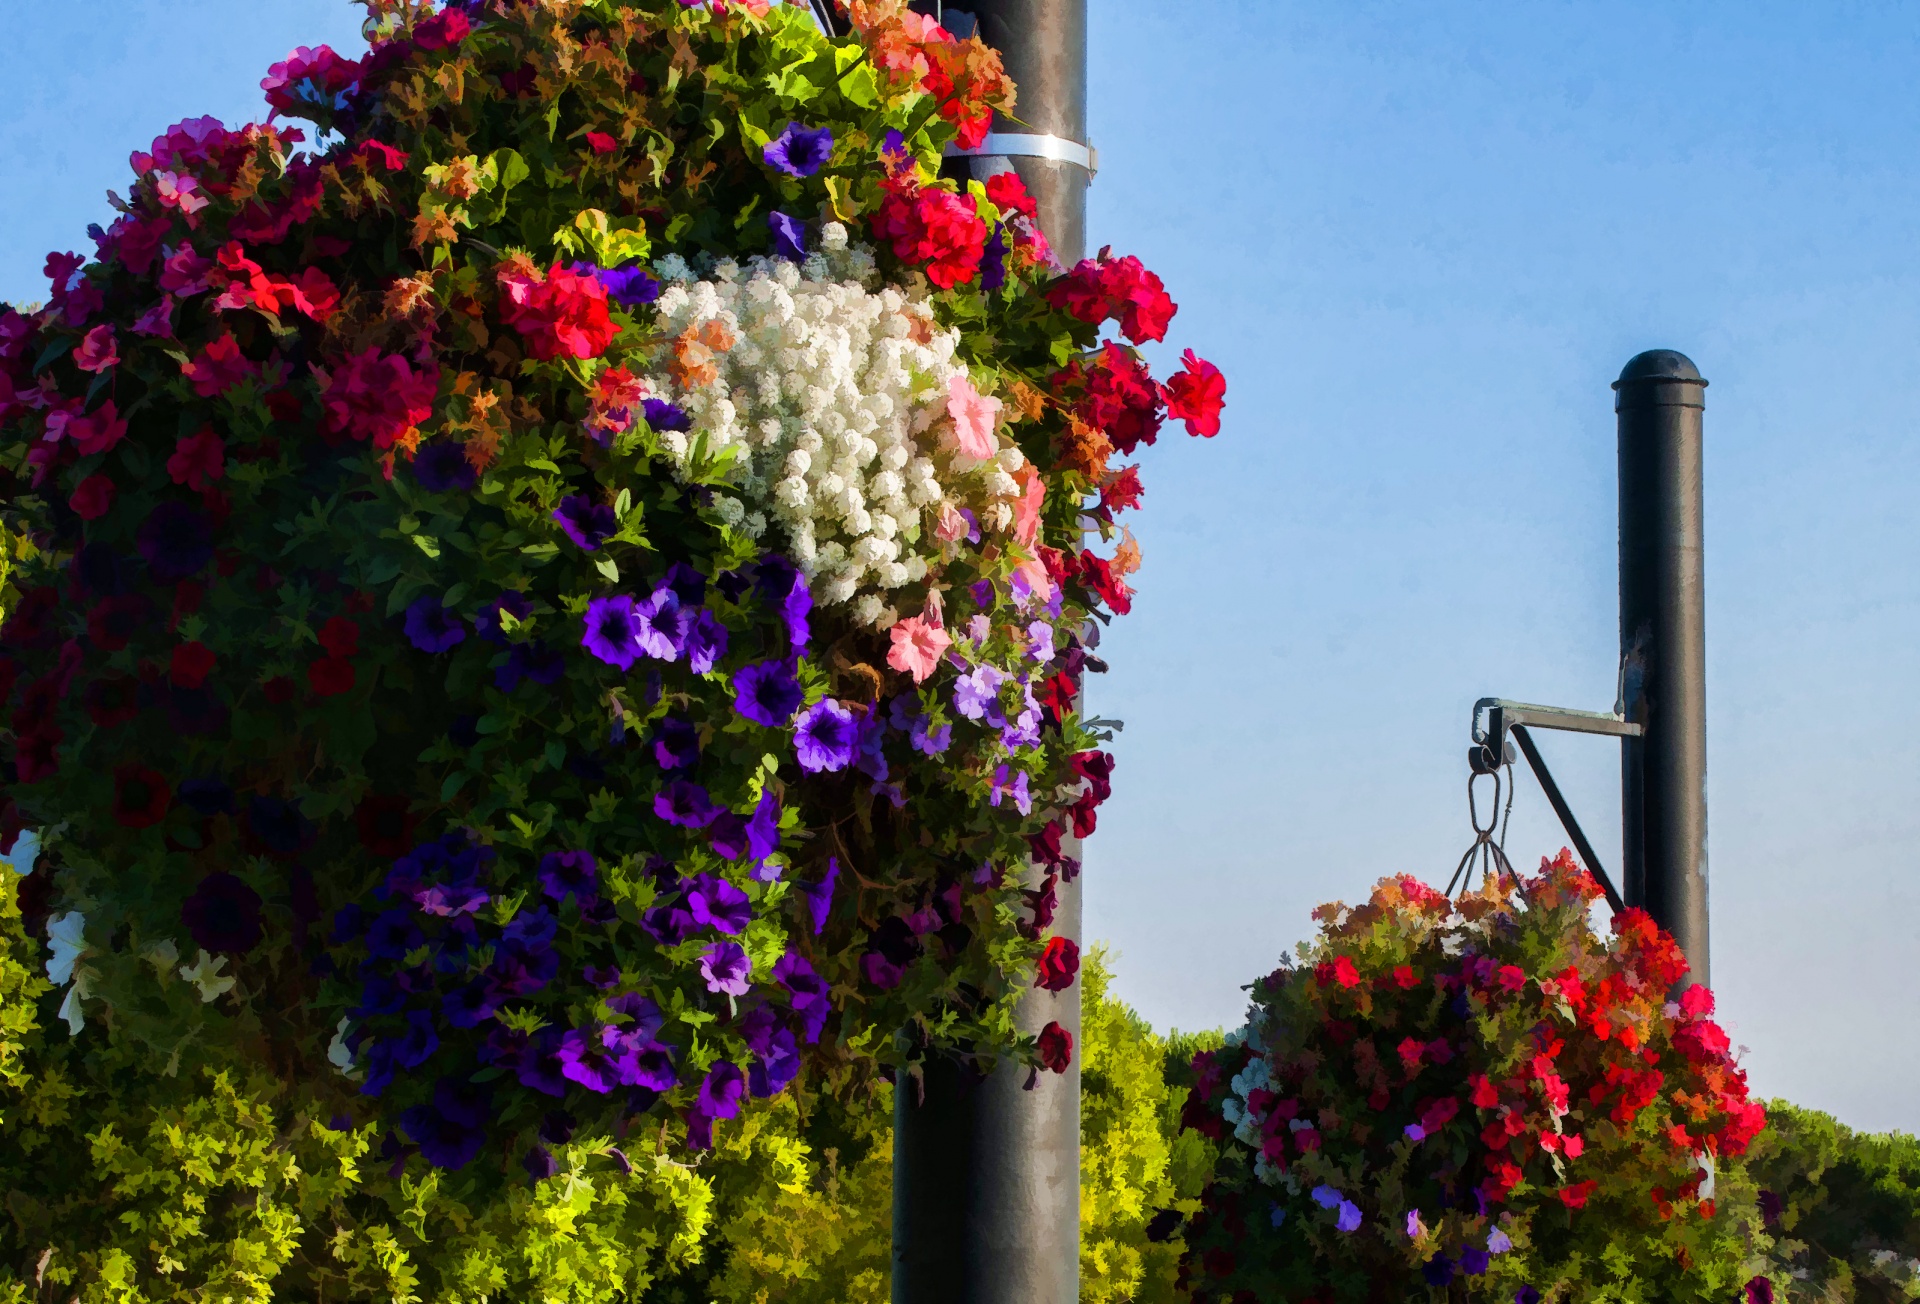 two hanging baskets of flowers